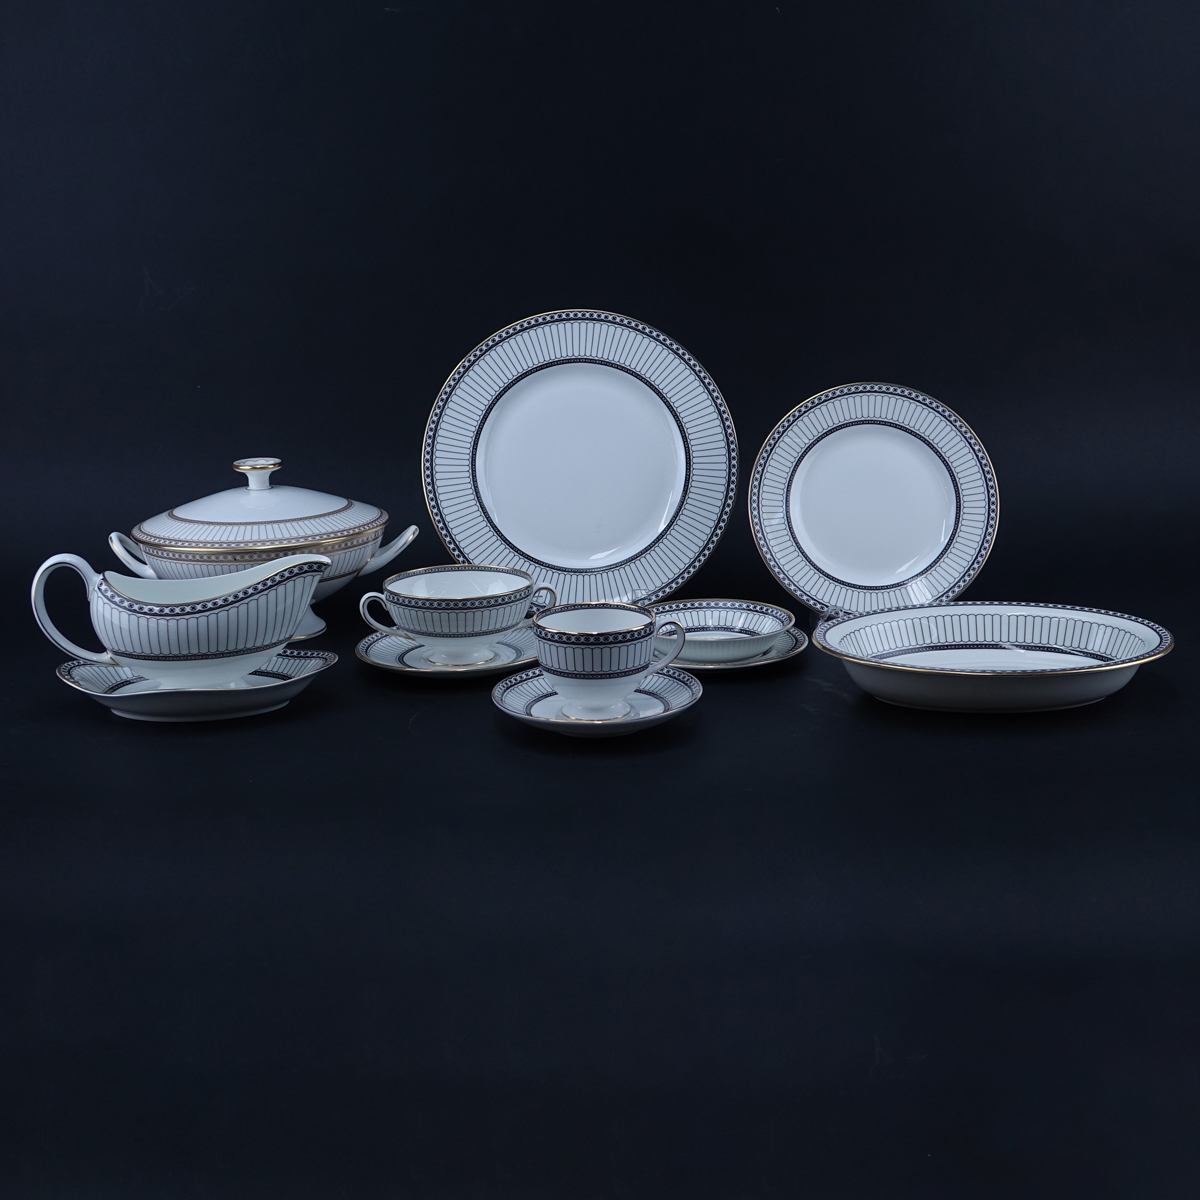 One Hundred Nine (109) Piece Wedgwood Colonnade Dinnerware. Includes in black: 12 plates 10-3/4", 12 salad plates, 12 bread & butter plates, 12 fruit bowls, 12 handled soup cups and 12 saucers, 16 ups and 16 saucers, gravy boat, 2 open serving dishes.